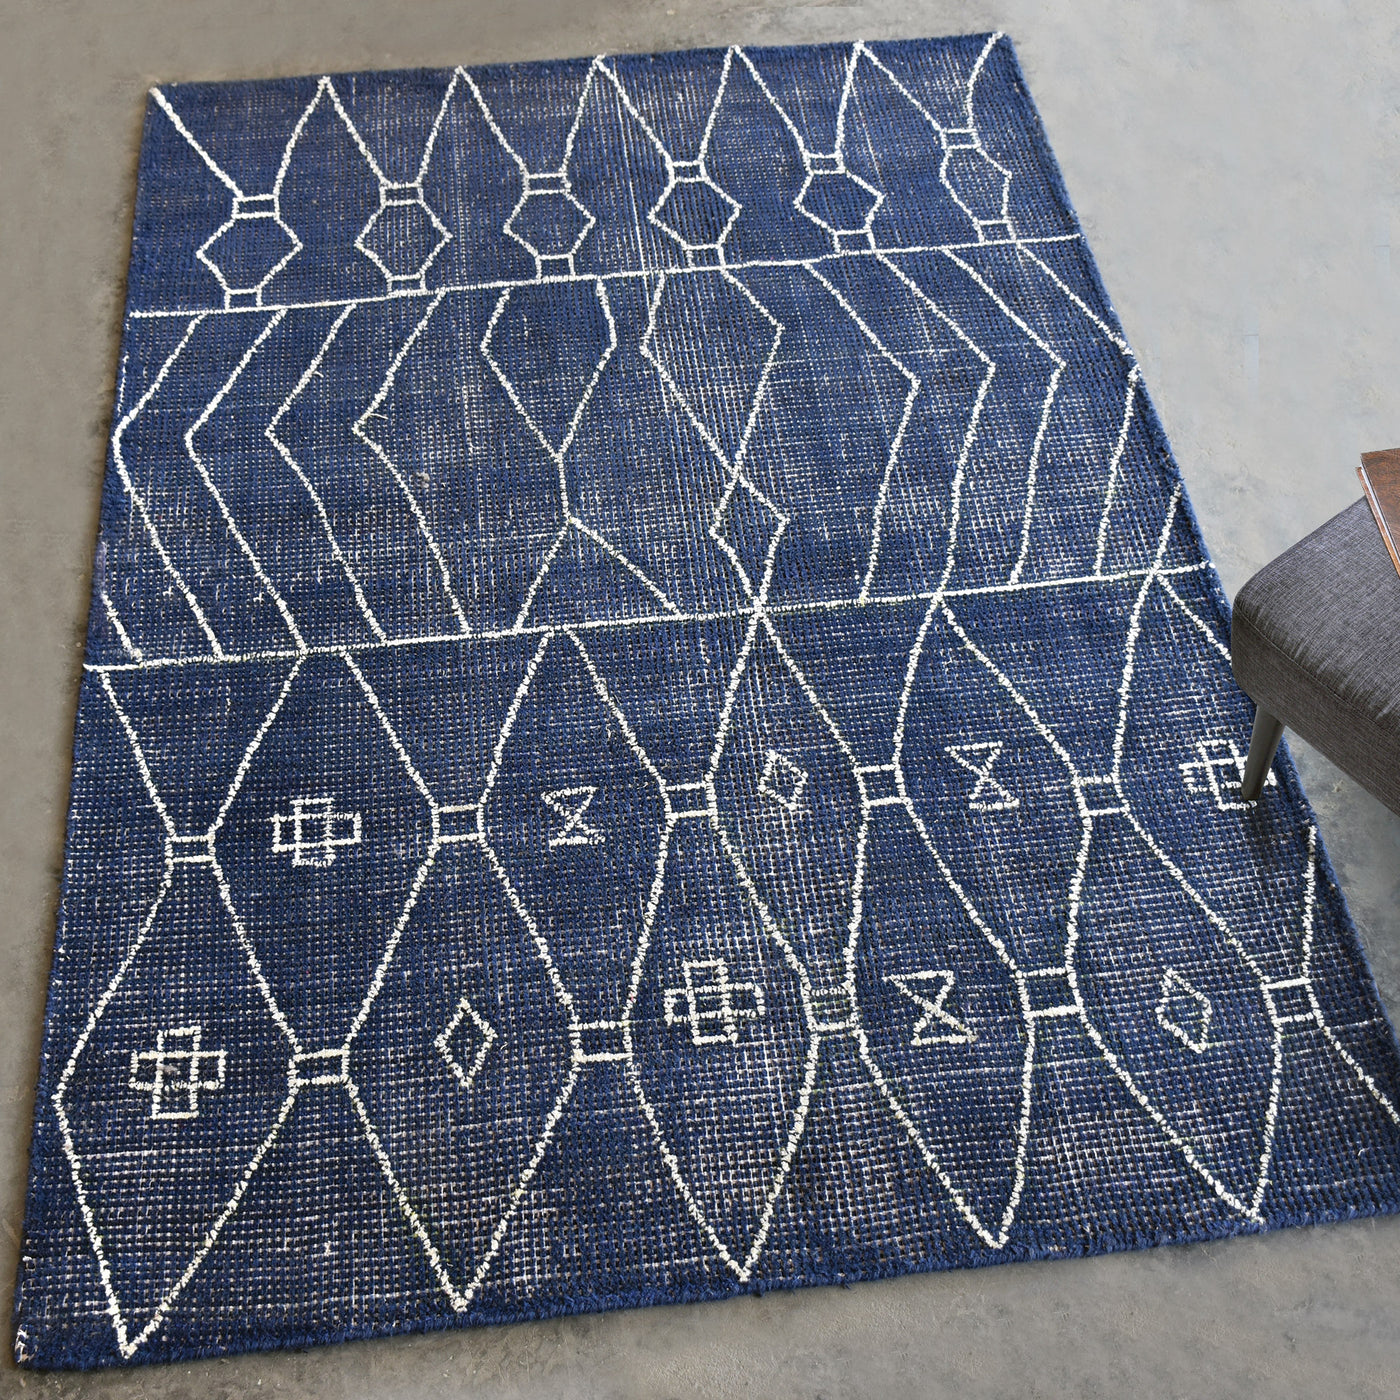 Hand Woven, Over Dyed, Indigo Blue Wool, Featuring A Bold White Tribal Inspired Design.